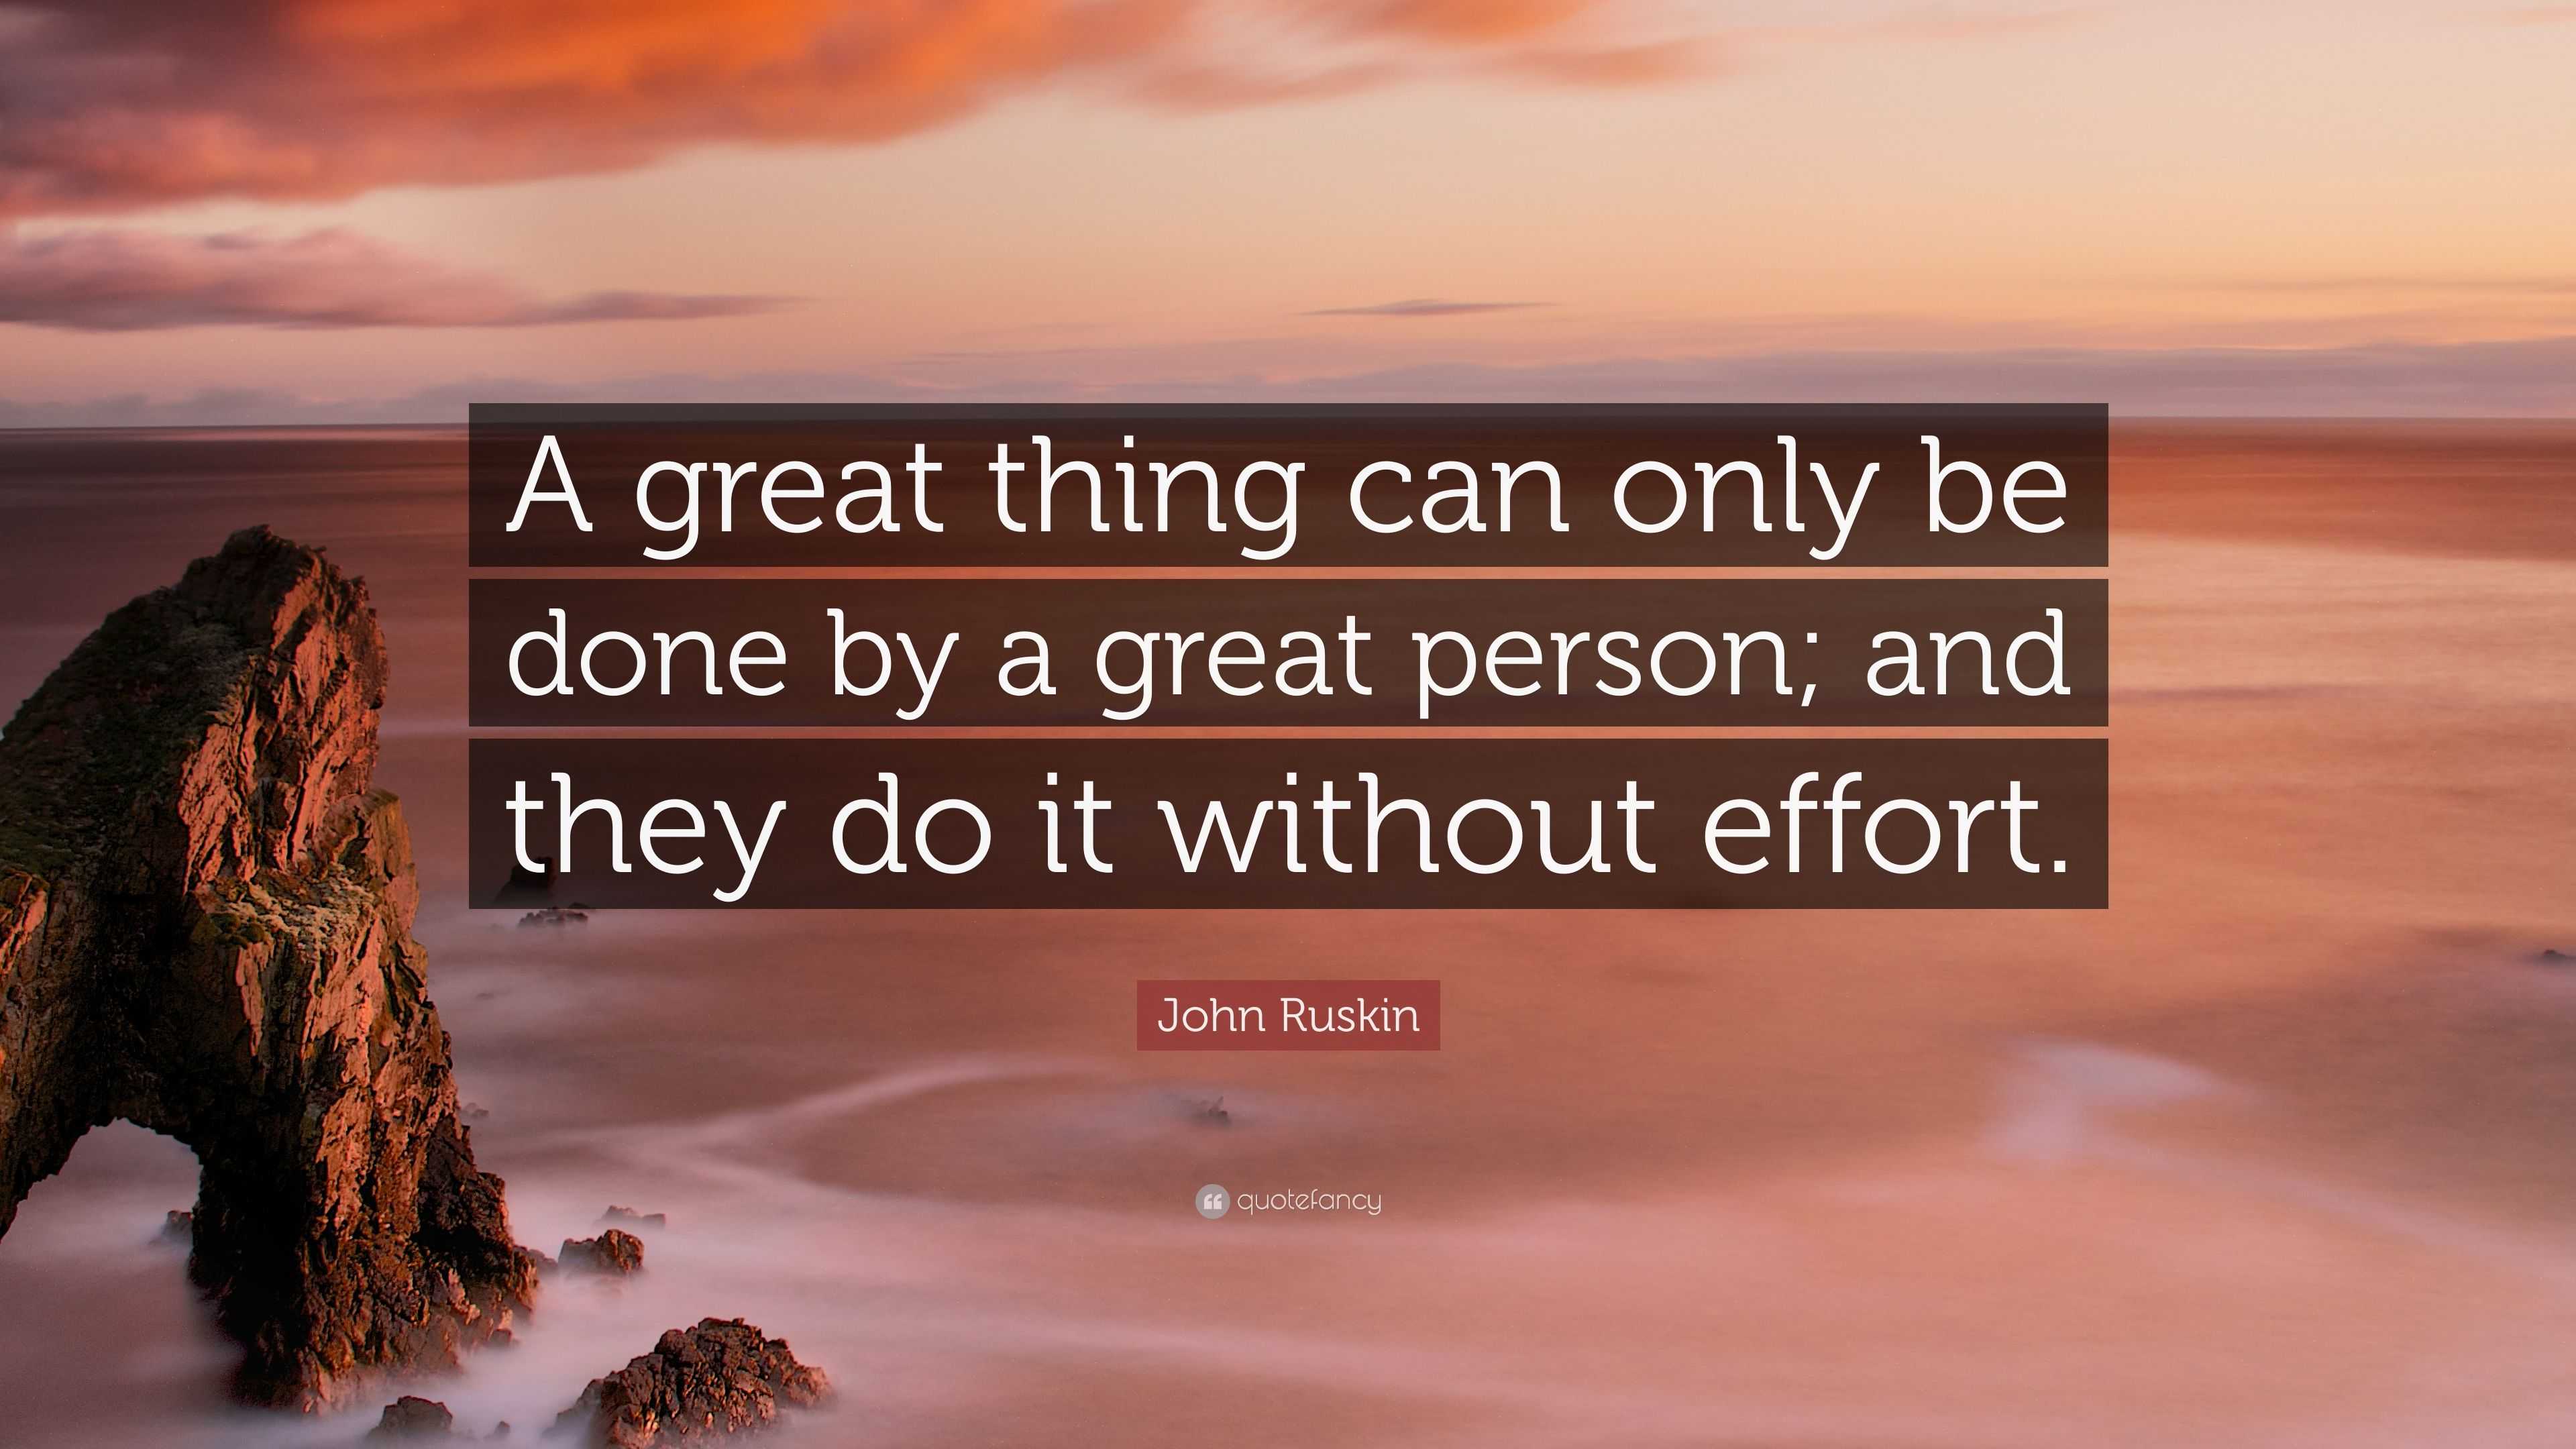 John Ruskin Quote: “A great thing can only be done by a great person ...